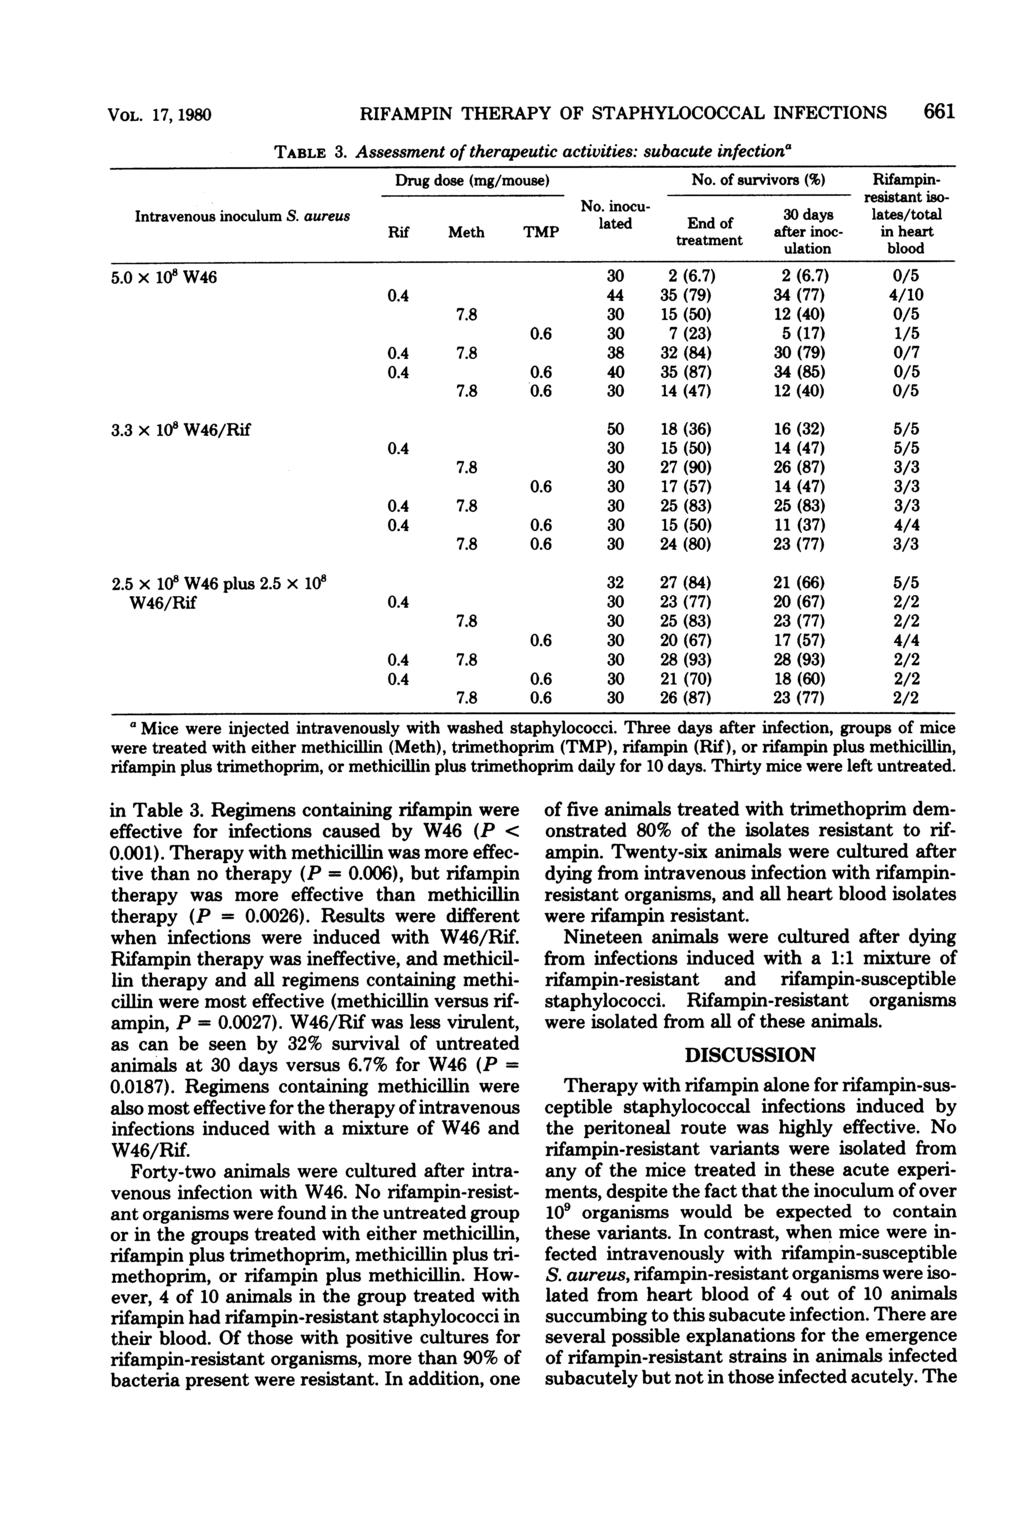 VOL. 17, 1980 RIFAMPIN THERAPY OF STAPHYLOCOCCAL INFECTIONS 661 TABLE 3. Assessment of therapeutic activities: subacute infectiona Drug dose (mg/mouse) No. of survivors (%) Rifampin- No.